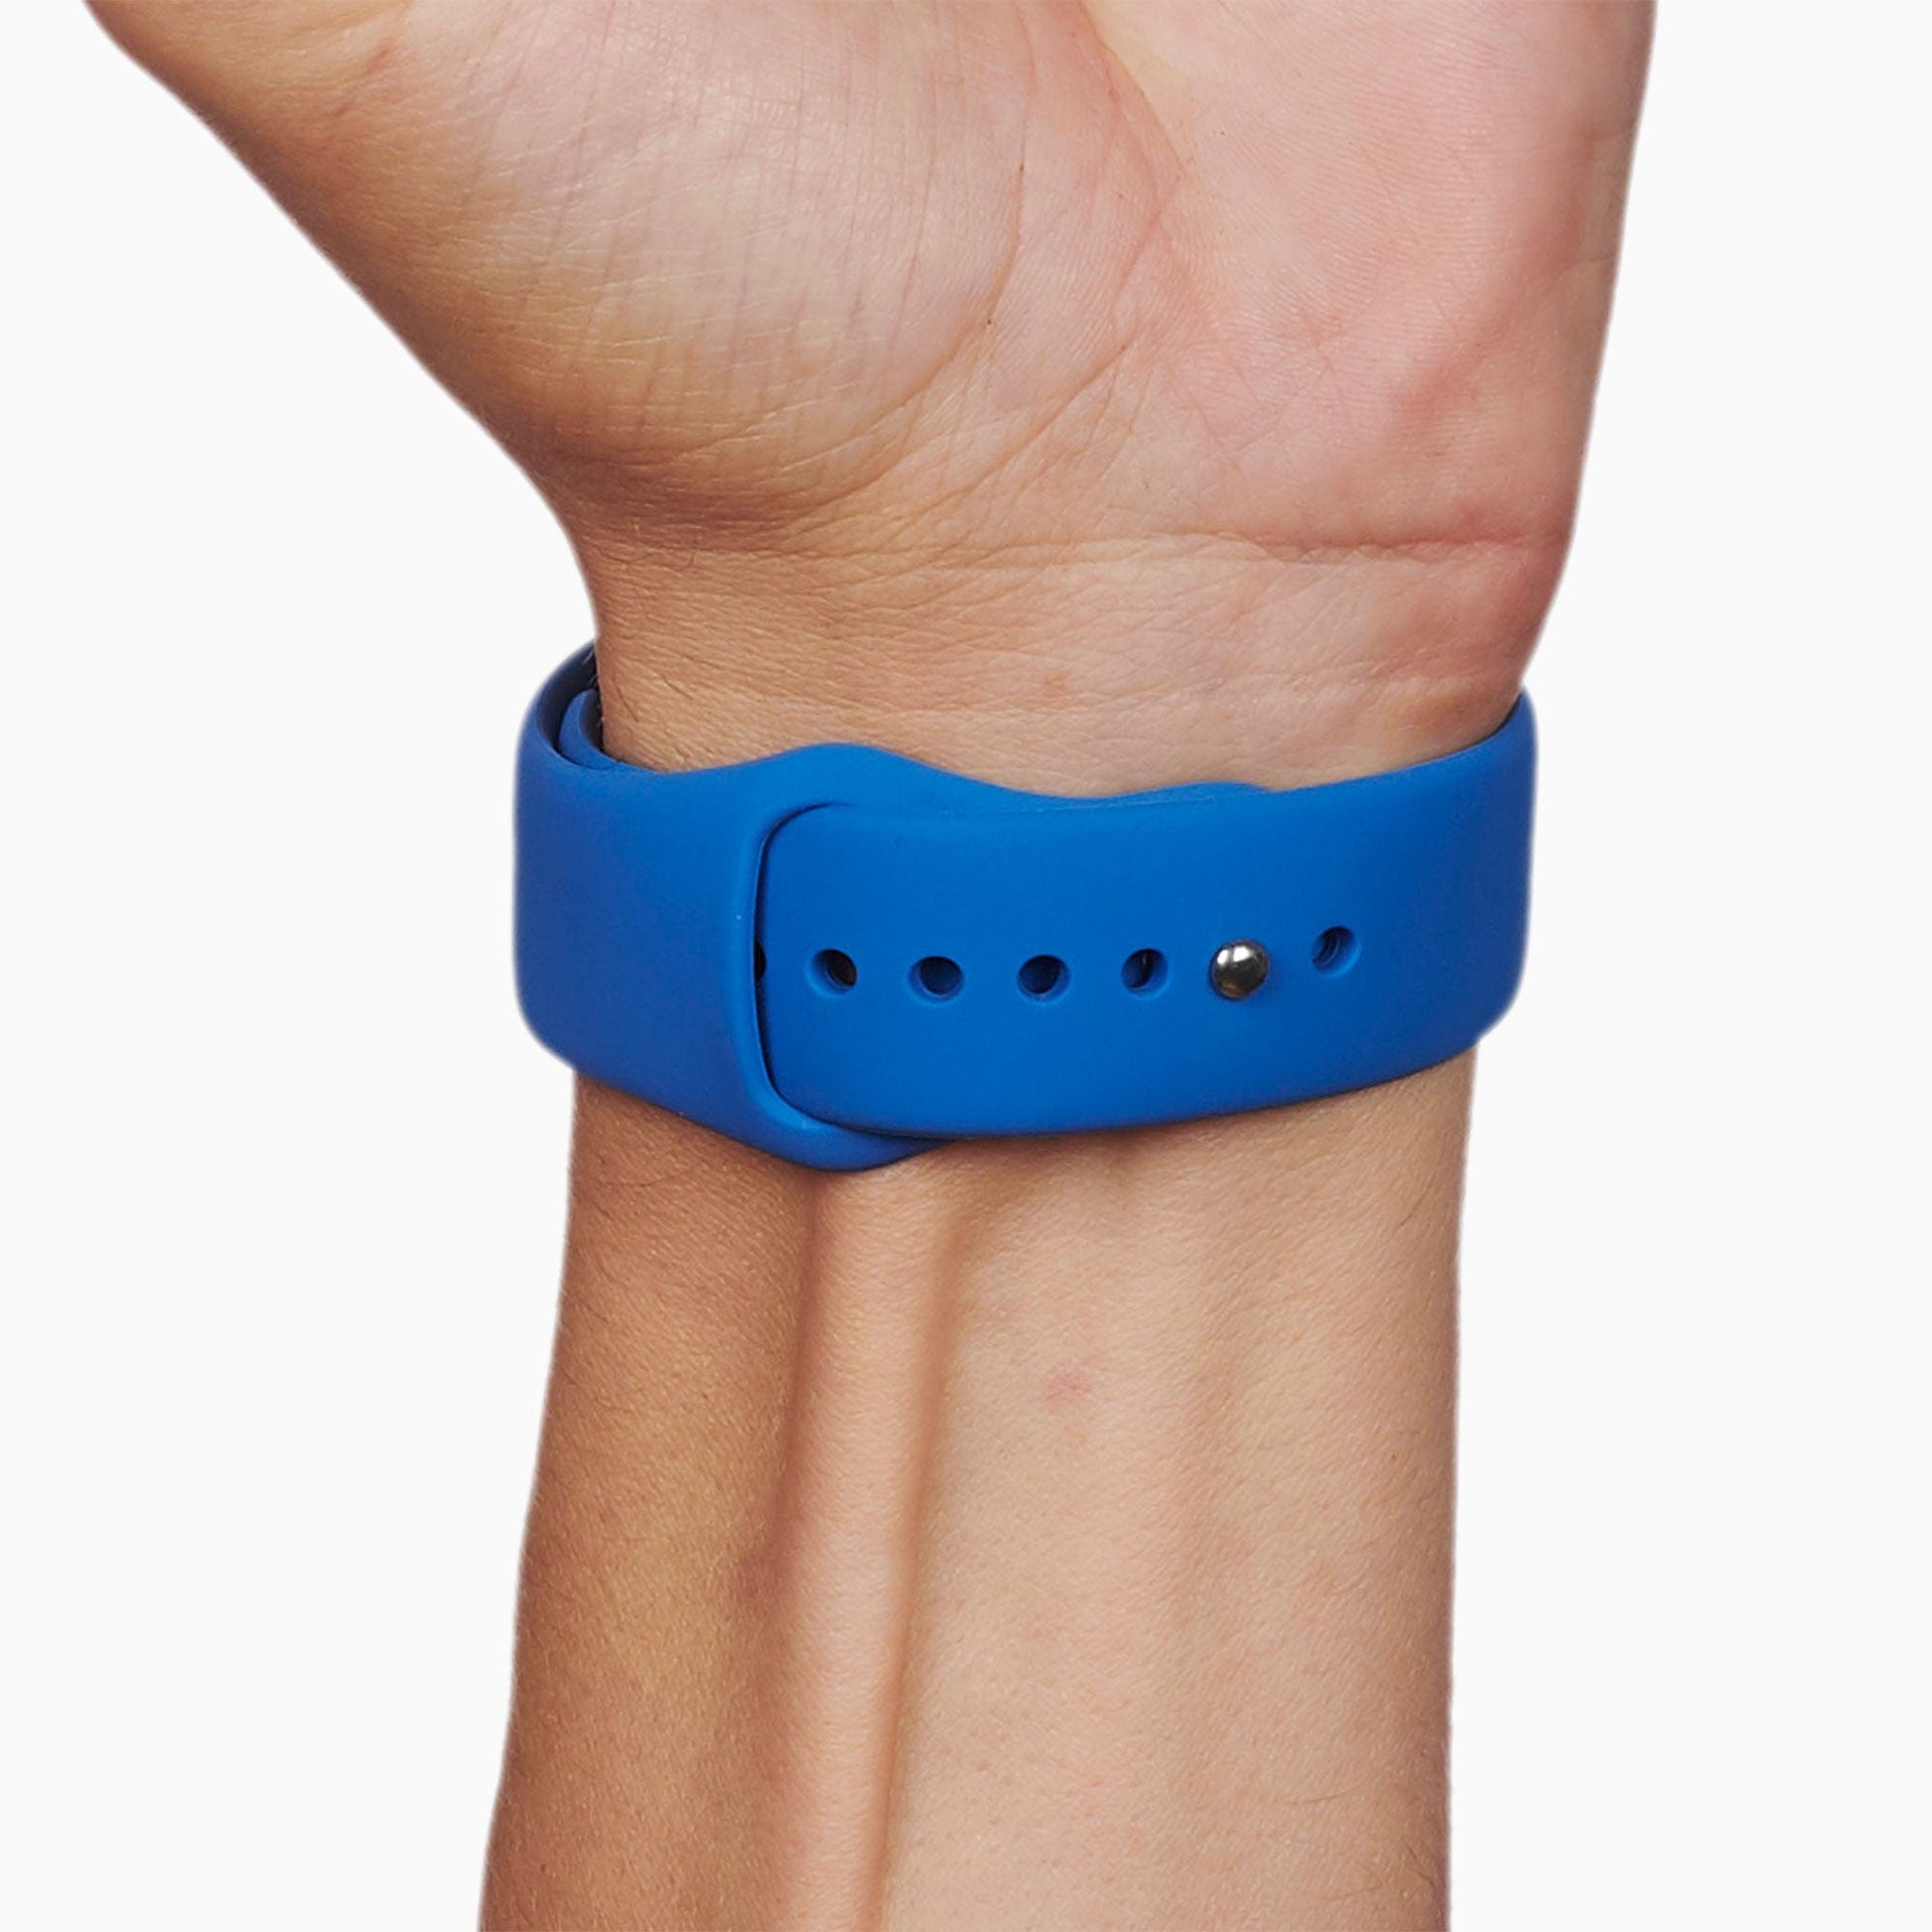 Delft Blue Sport Band for Apple Watch